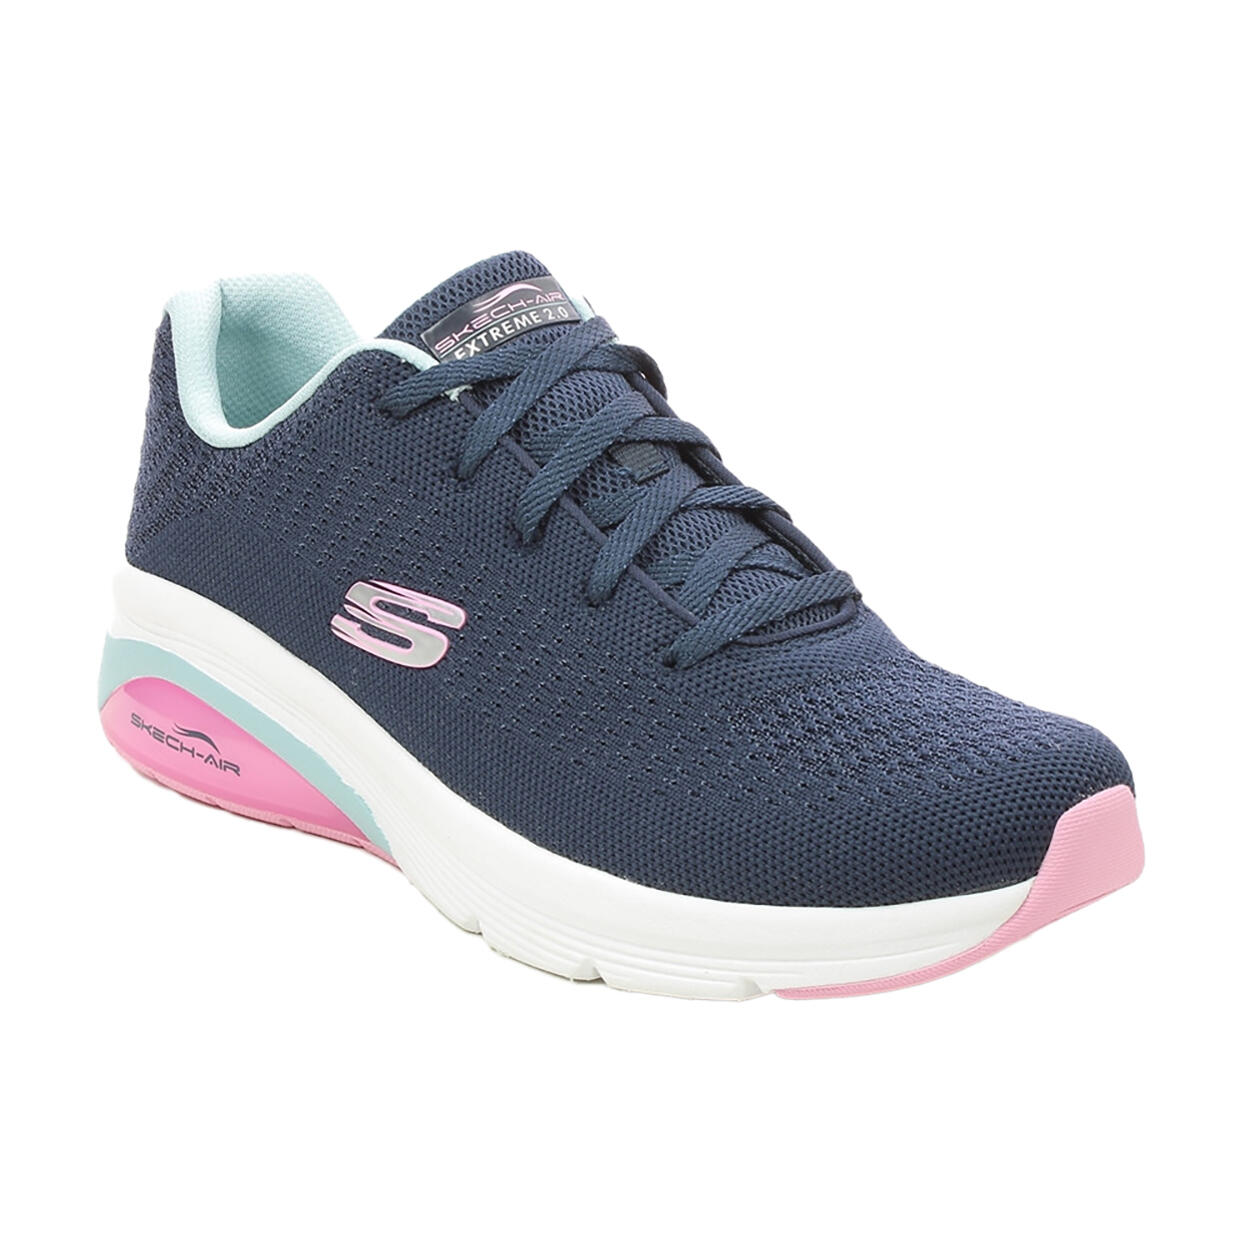 SKECHERS Womens/Ladies SkechAir Extreme 2.0 Classic Vibe Trainers (Navy/Light Blue)